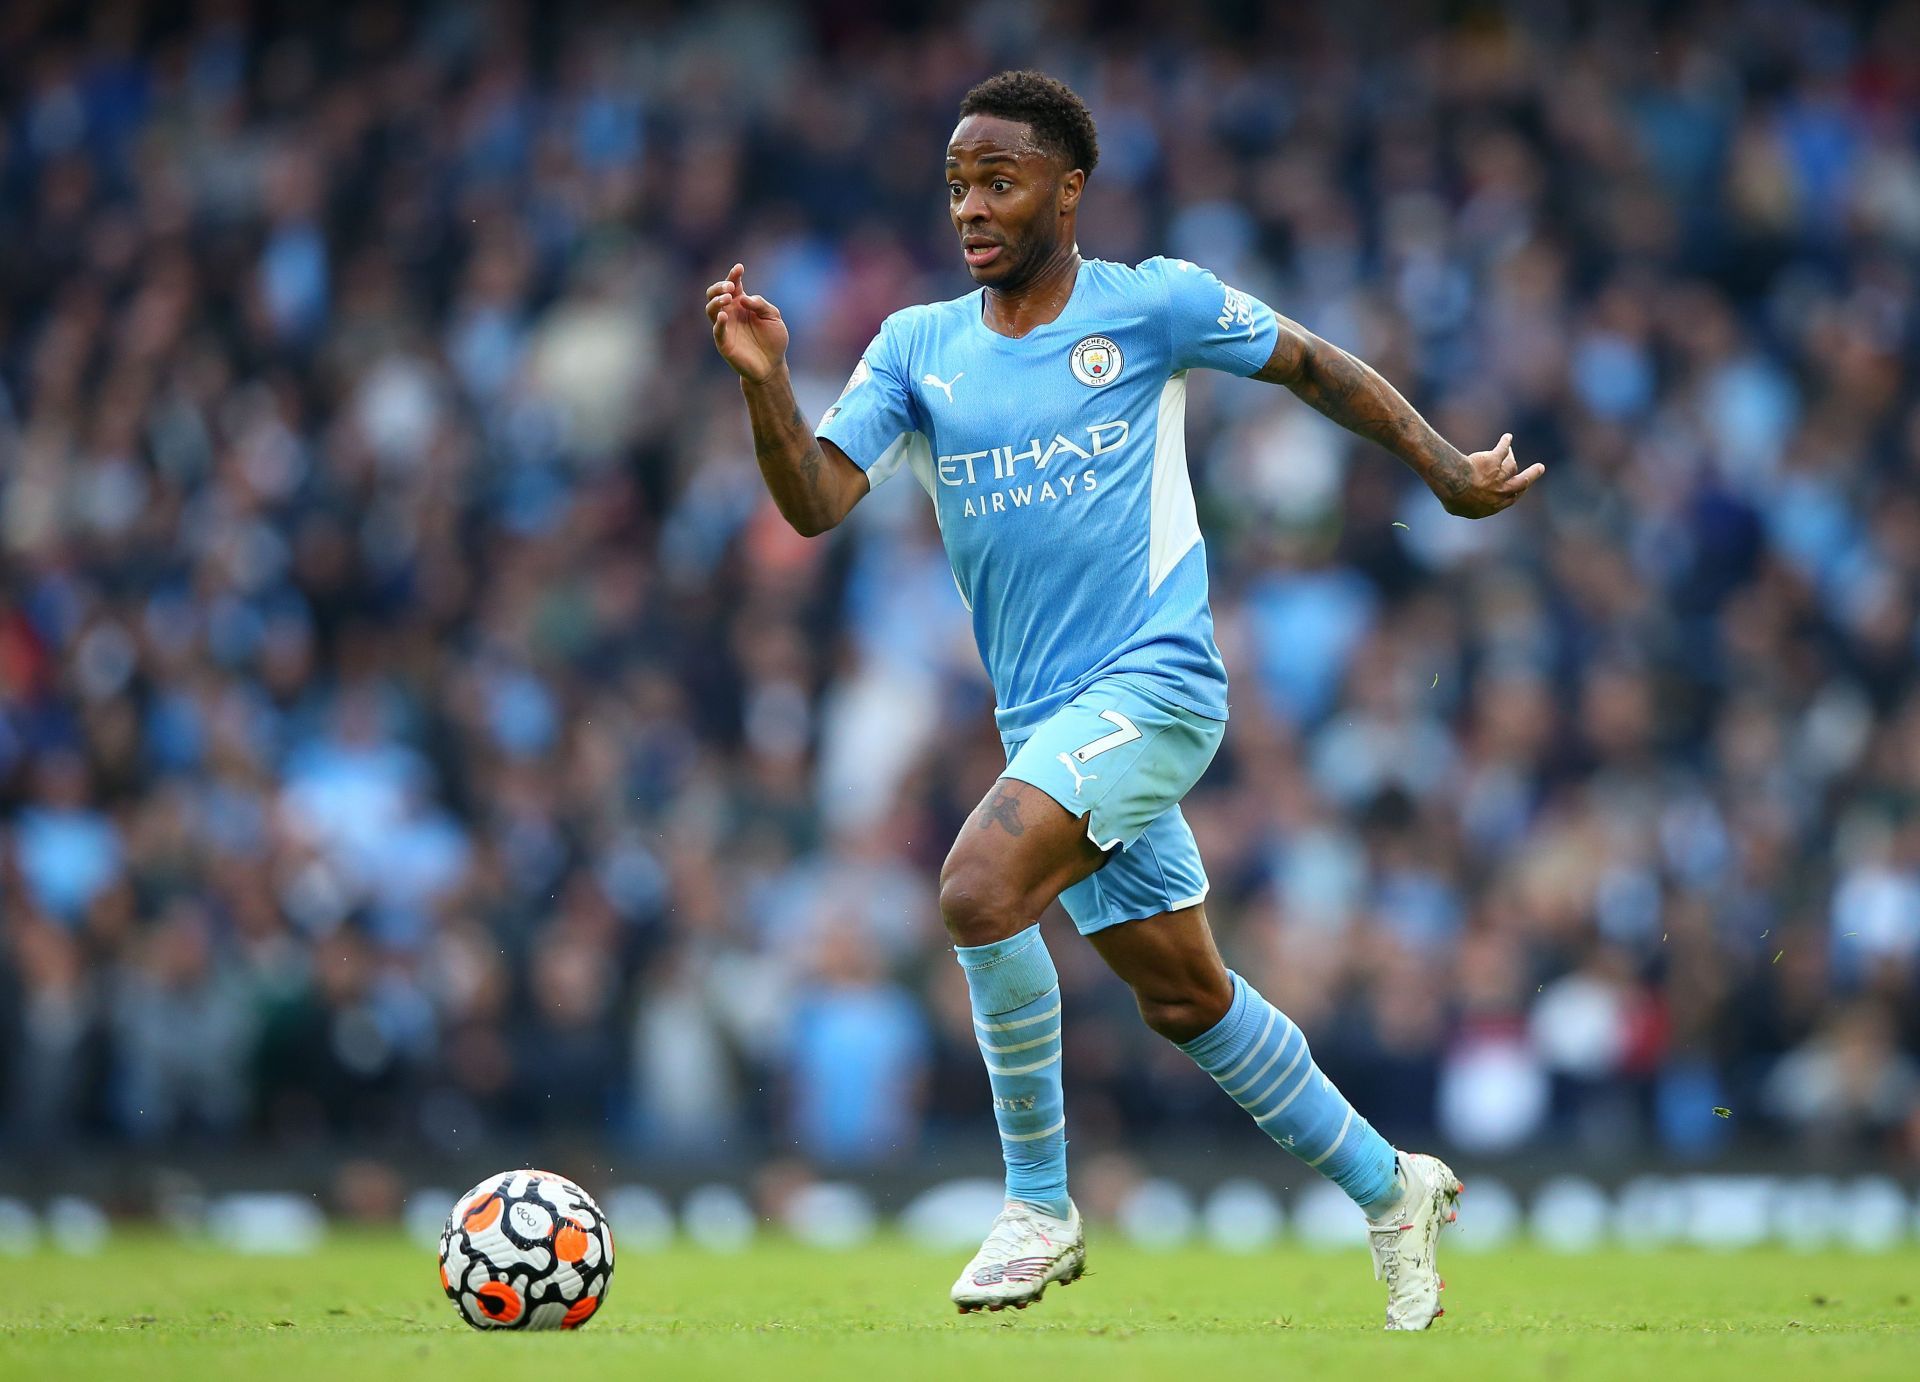 Real Madrid have joined the race to sign Raheem Sterling.